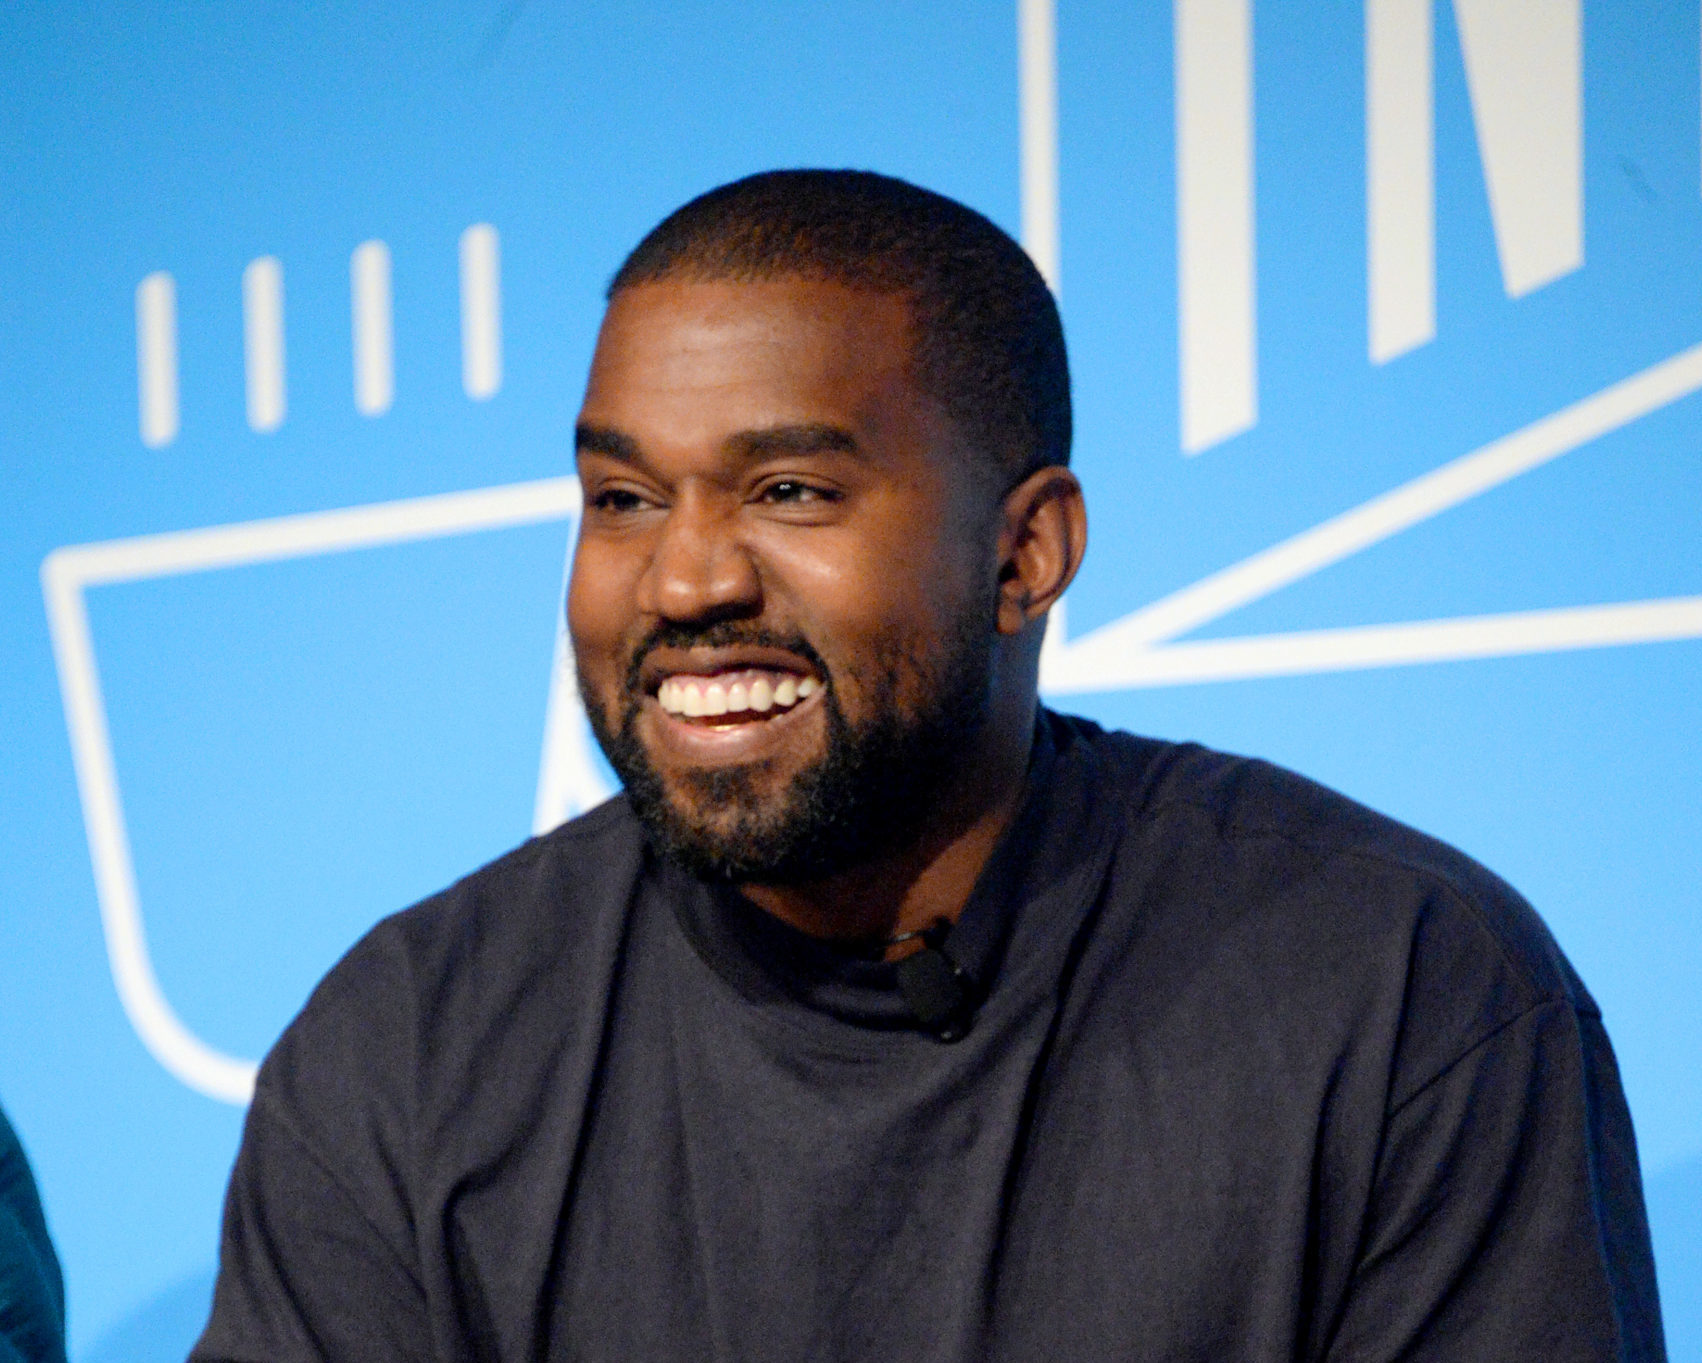 Kanye West officially changes his name to "Ye."